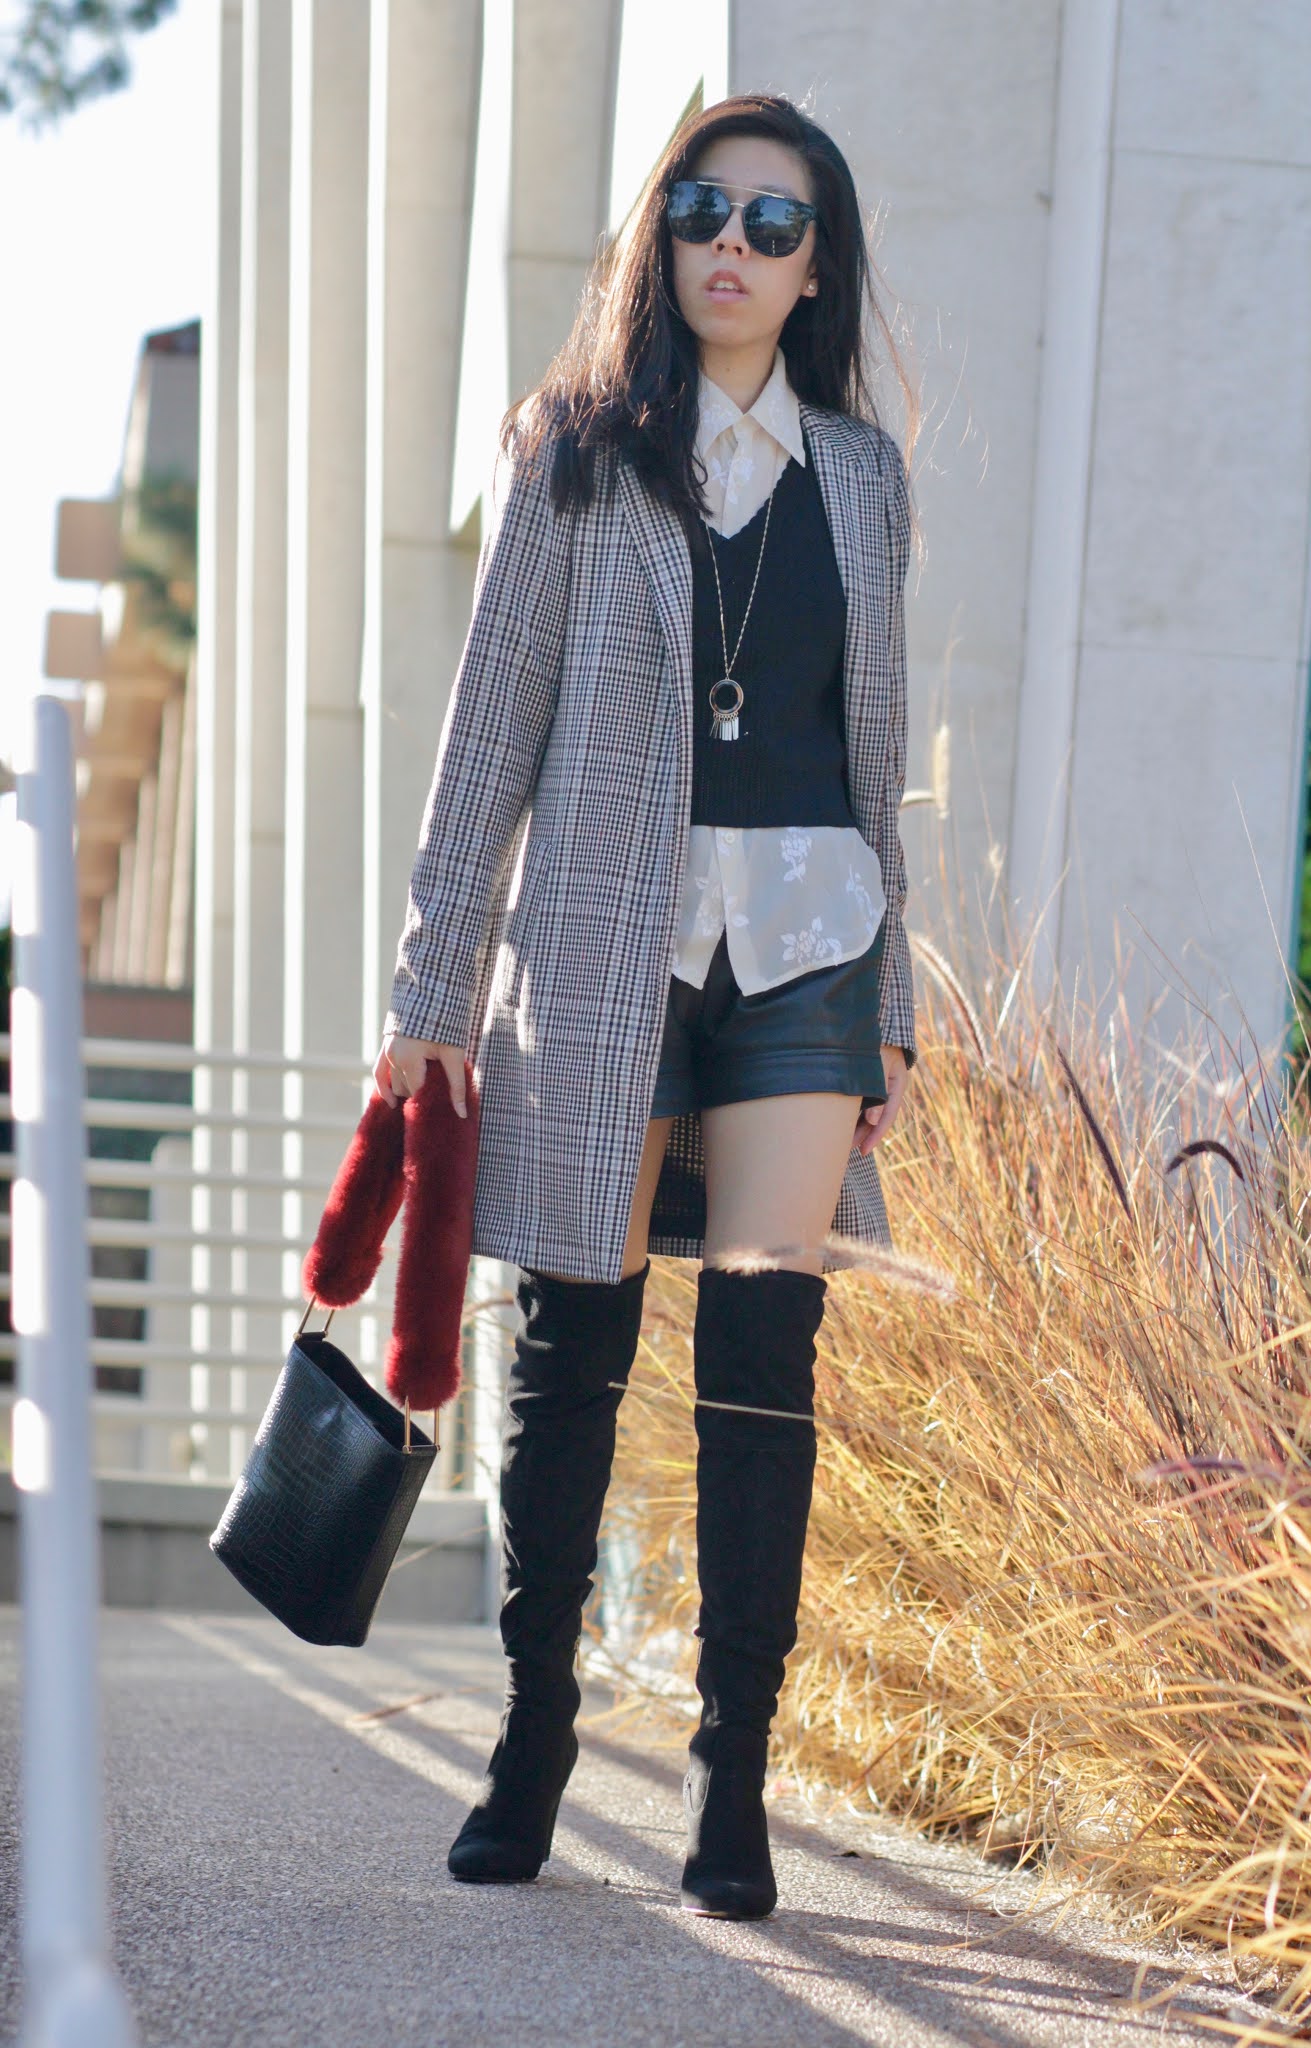 Black and Plaid Outfit Ideas_Ivy League Outfit Ideas_What to Wear to College in Fall_Cambridge Light Academia Outfit Ideas_Adrienne Nguyen